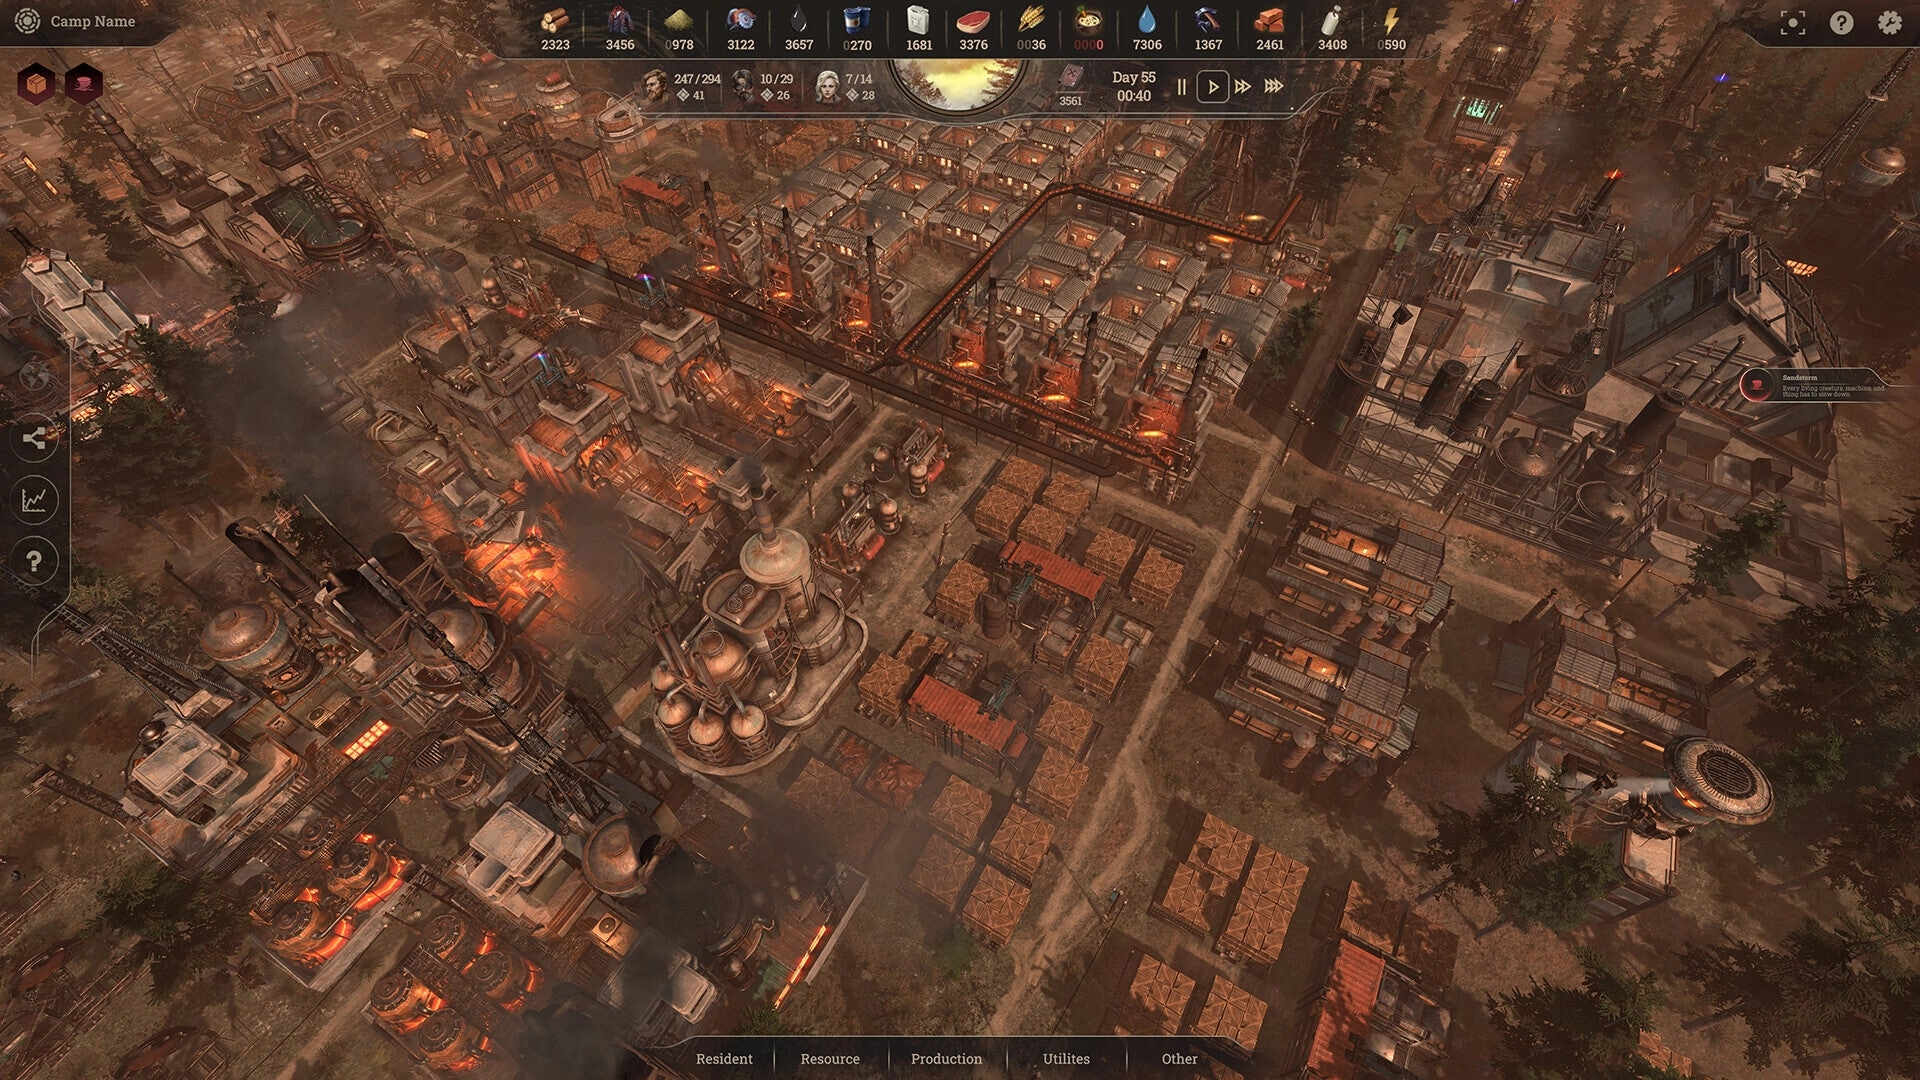 New Cycle: A City-Builder Set in a Dieselpunk Apocalypse